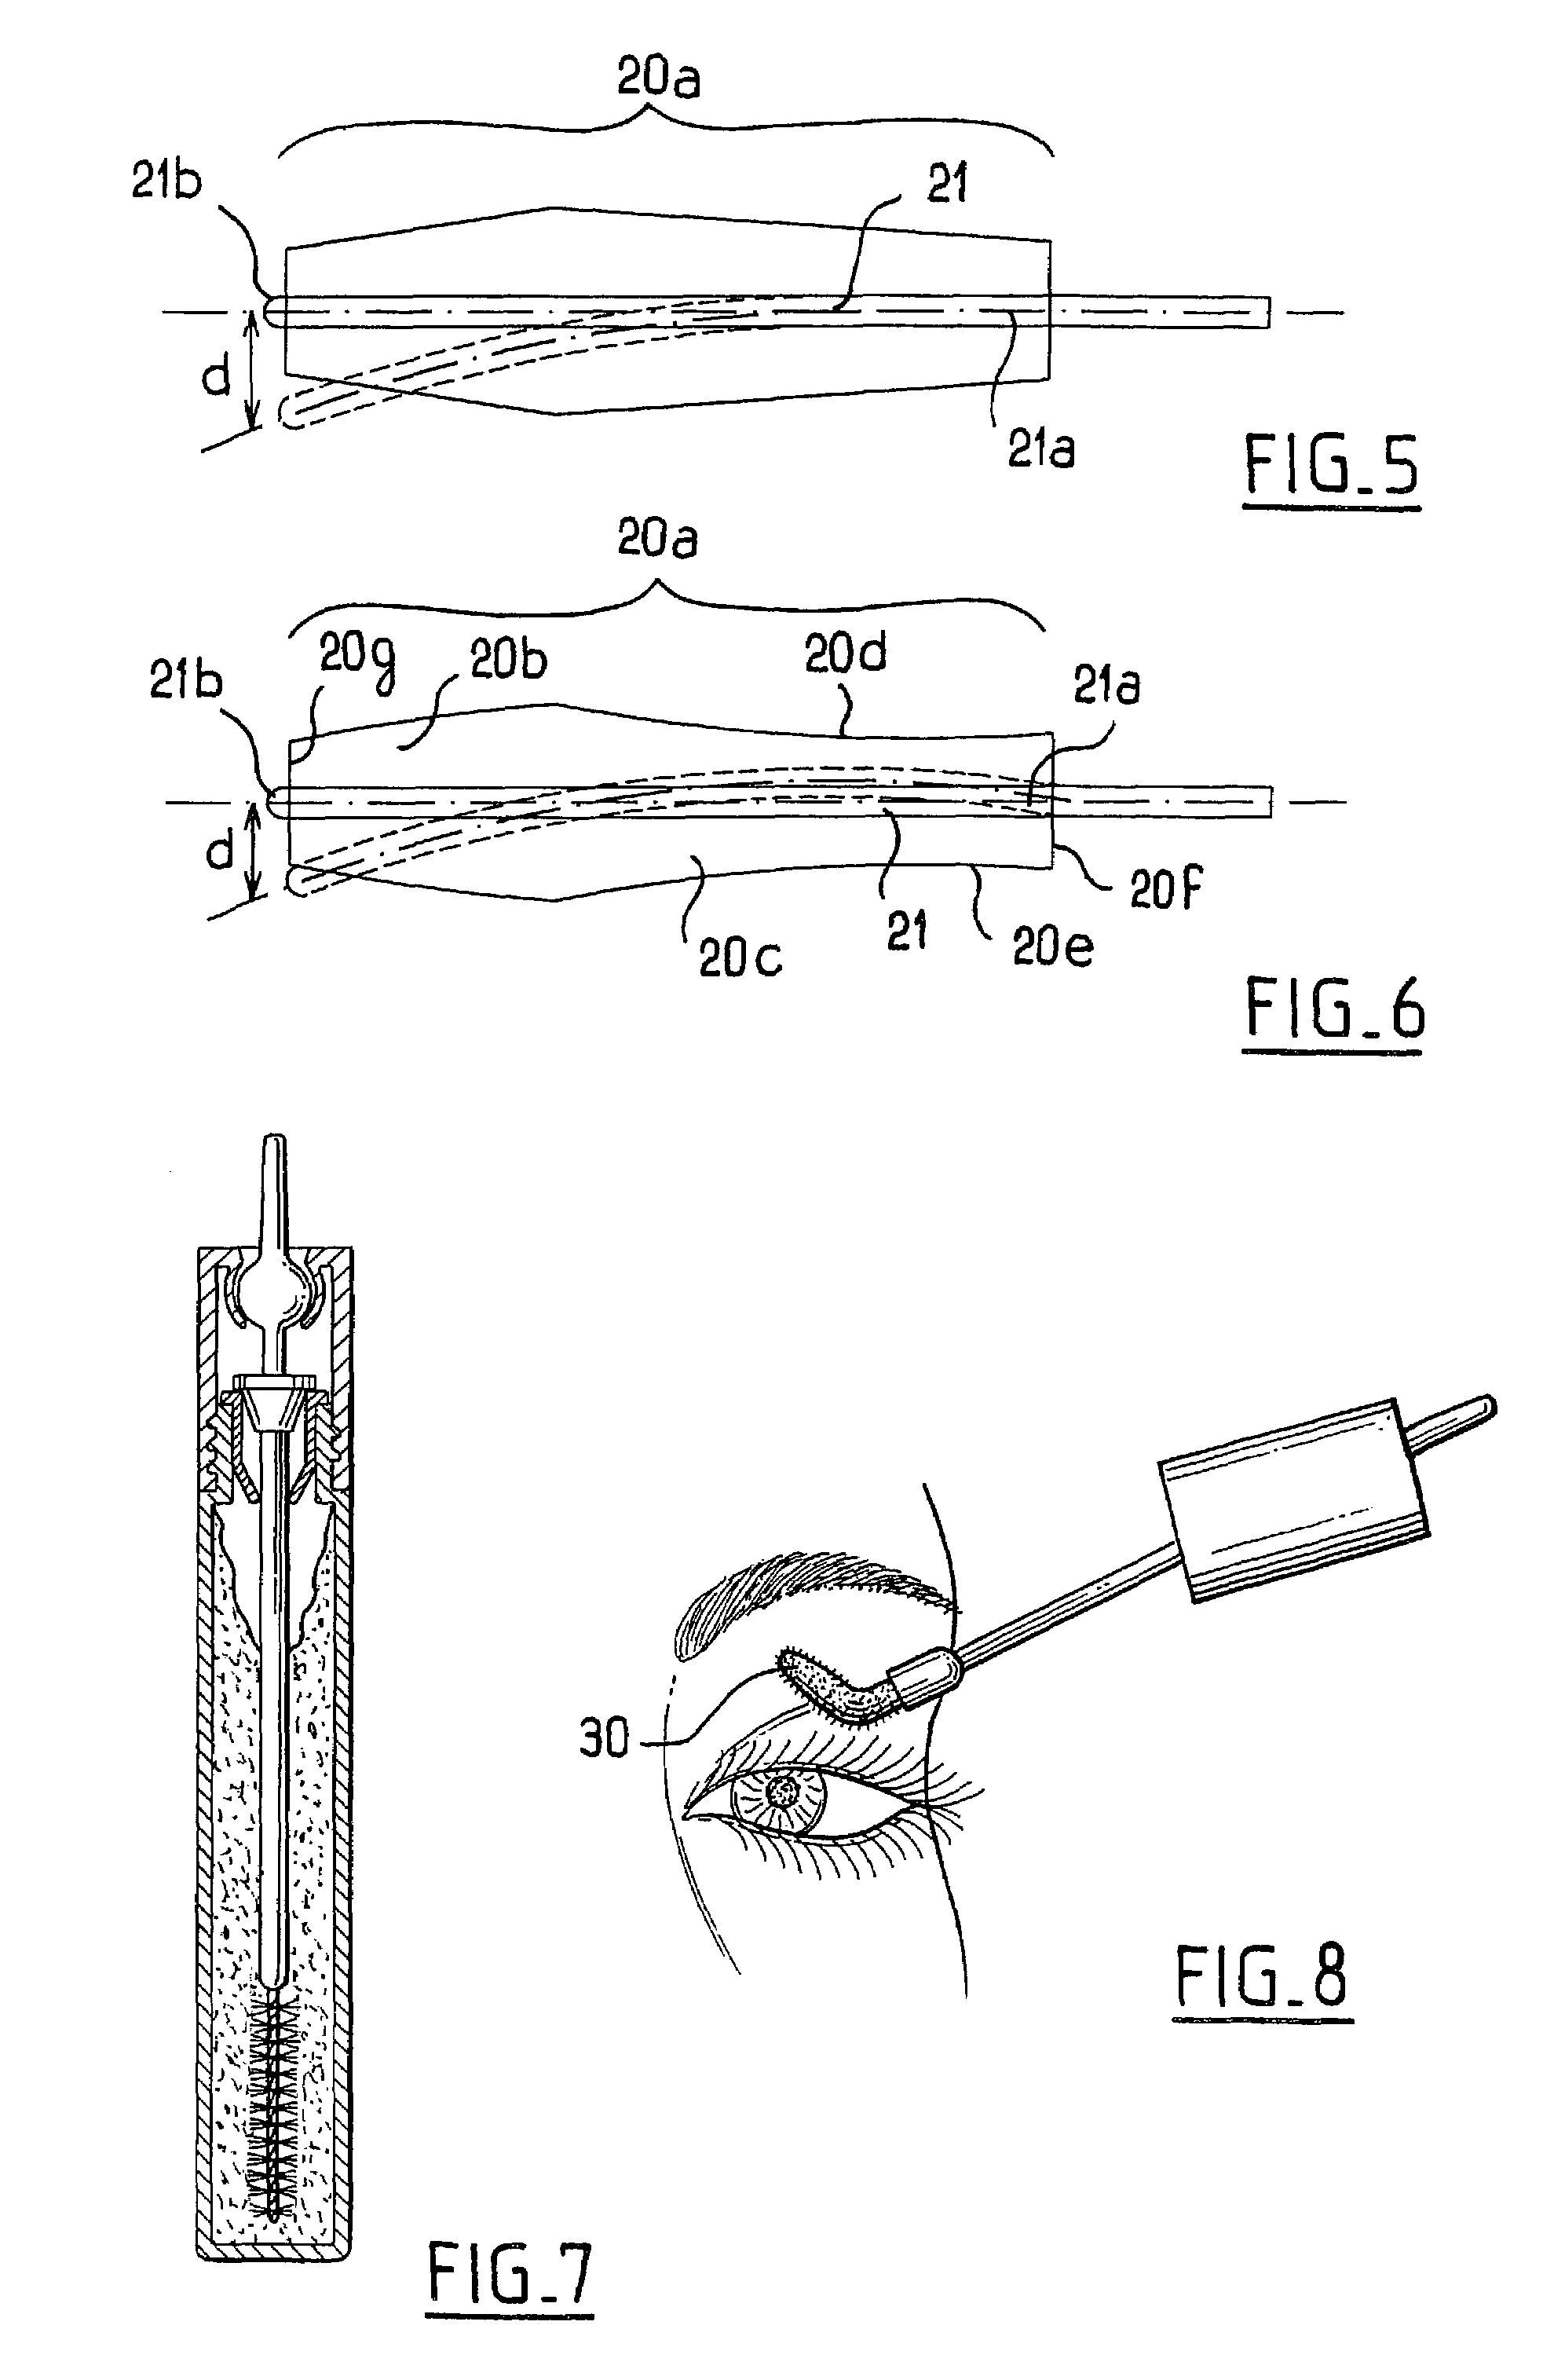 Applicator including a stem connected to a handle member via a hinge